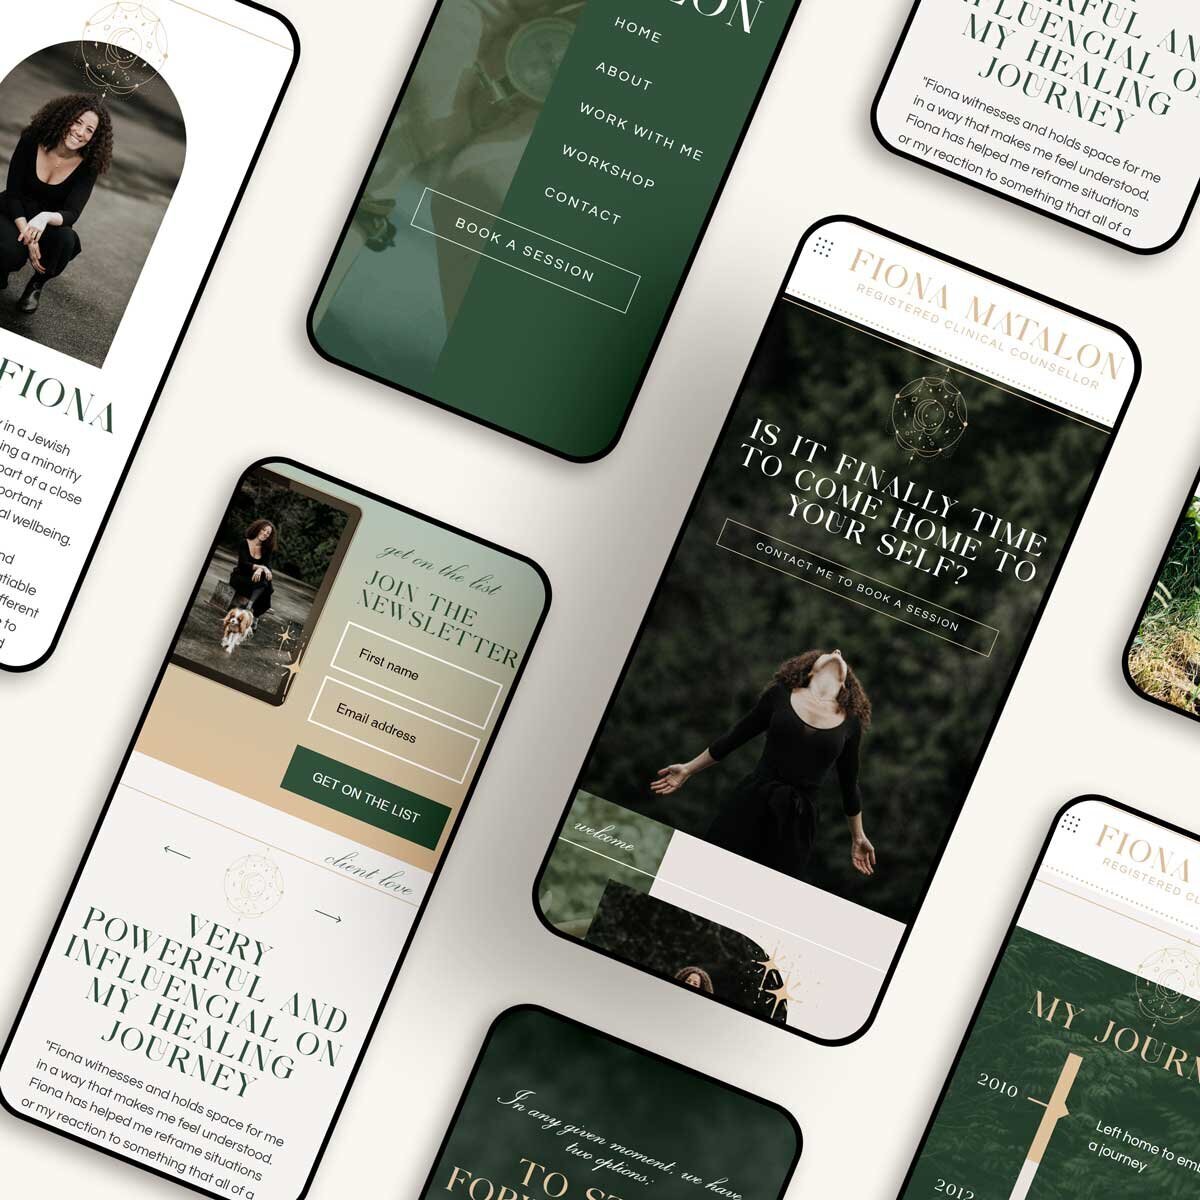 Immerse yourself in the serenity and healing vibes of this project, crafted by me, Heather Jones, a skilled Showit Web Designer. It perfectly complements Fiona's somatic guidance and psychotherapy services, setting the tone for a calming online experience.